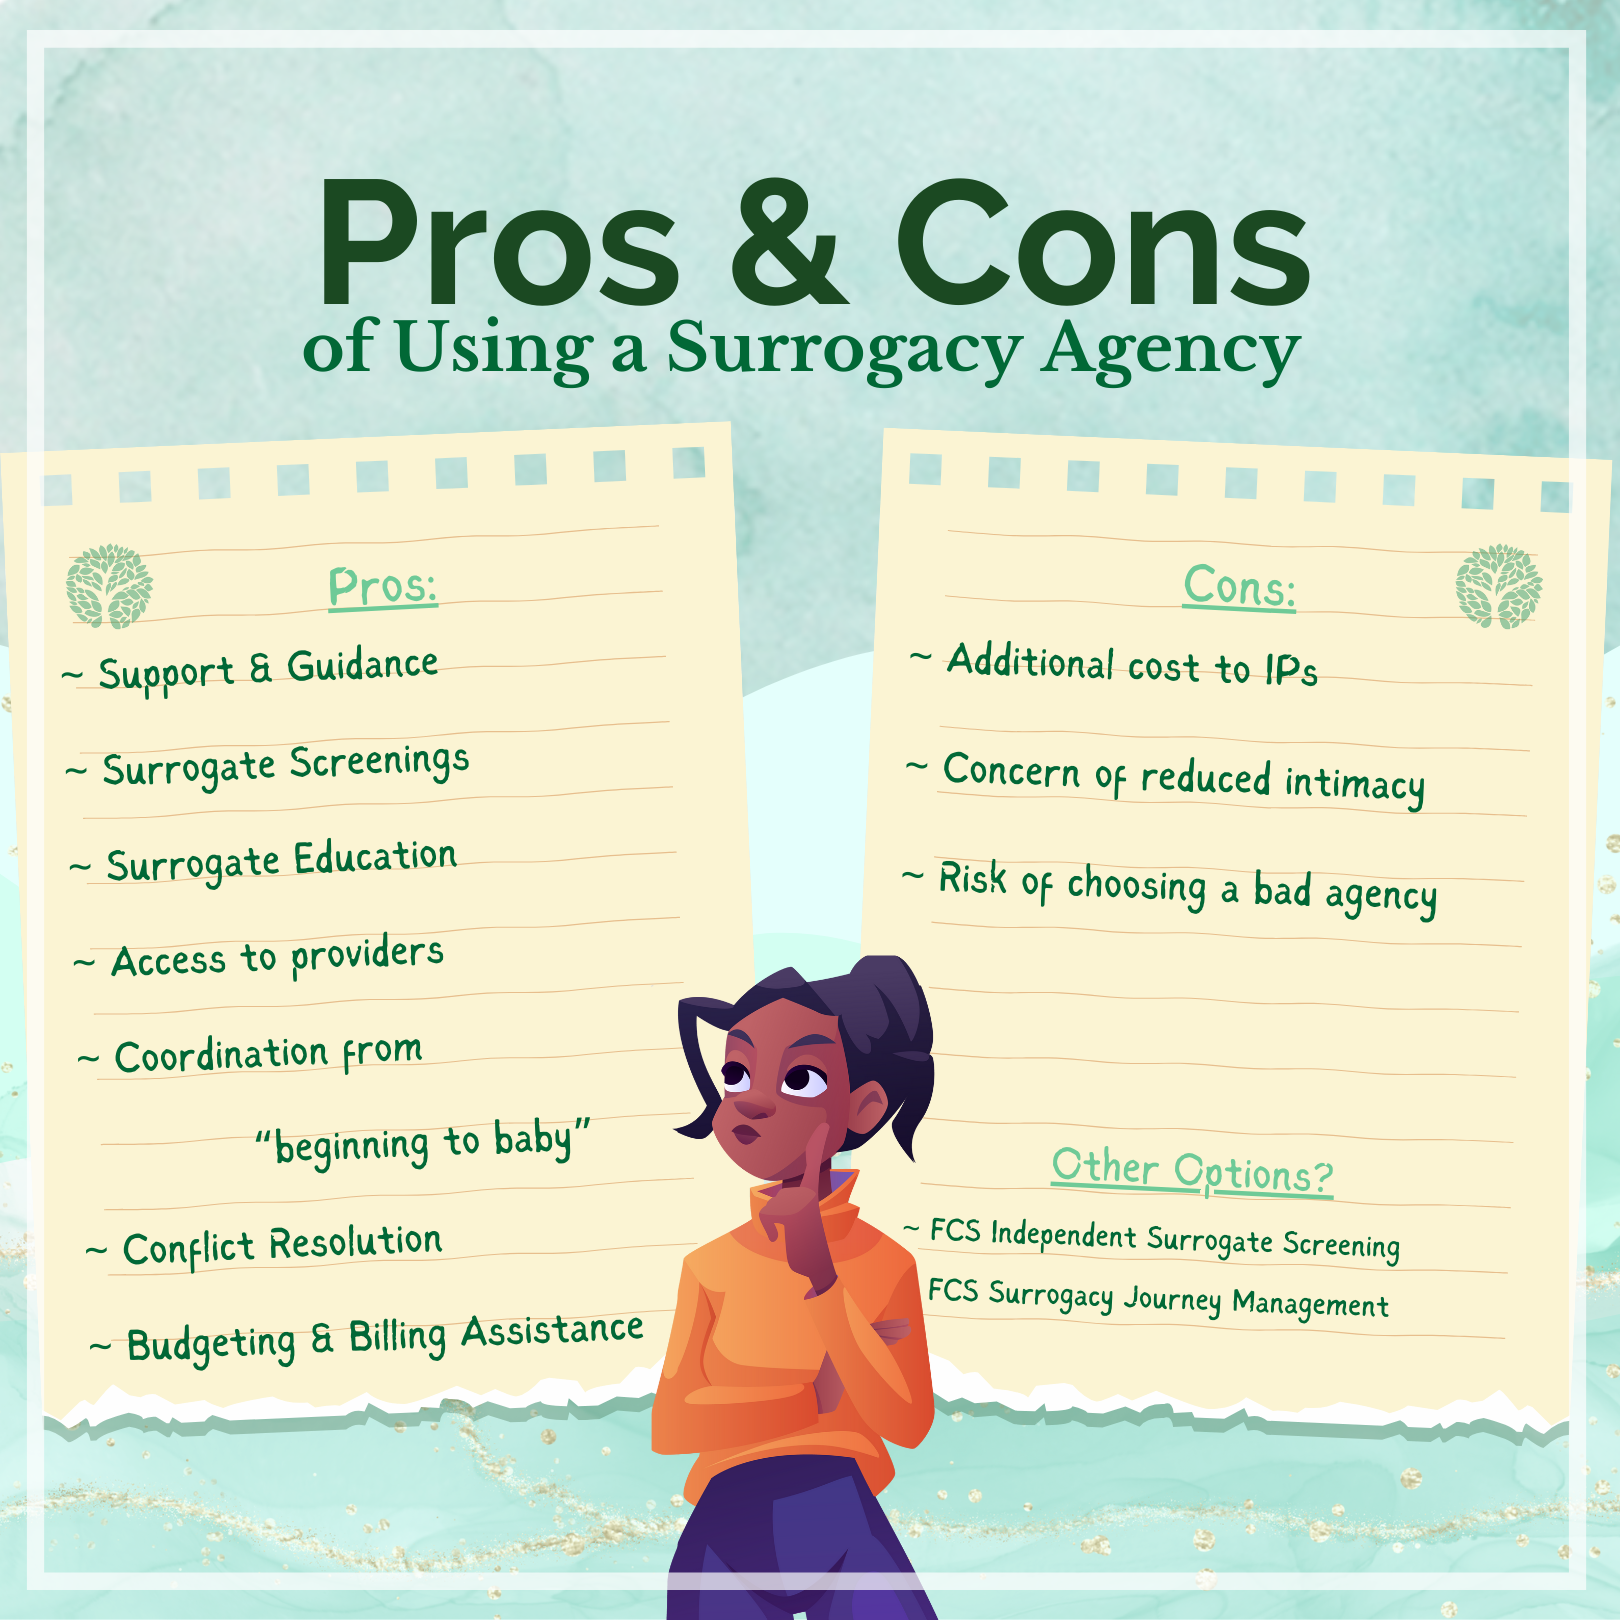 Pros & Cons of Using a Surrogacy Agency: Pros: Support & Guidance, Surrogate Screenings, Surrogate Education, Access to Providers, Coordination from "beginning to baby," Conflict Resolution, Budgeting & Billing assistance. Cons: Additional cost to IPs, Concern of reduced intimacy, risk of choosing a bad agency. Other Options: FCS Independent Surrogate Screening, FCS Surrogacy journey Management. Woman considering options on two note papers, FCS Logo